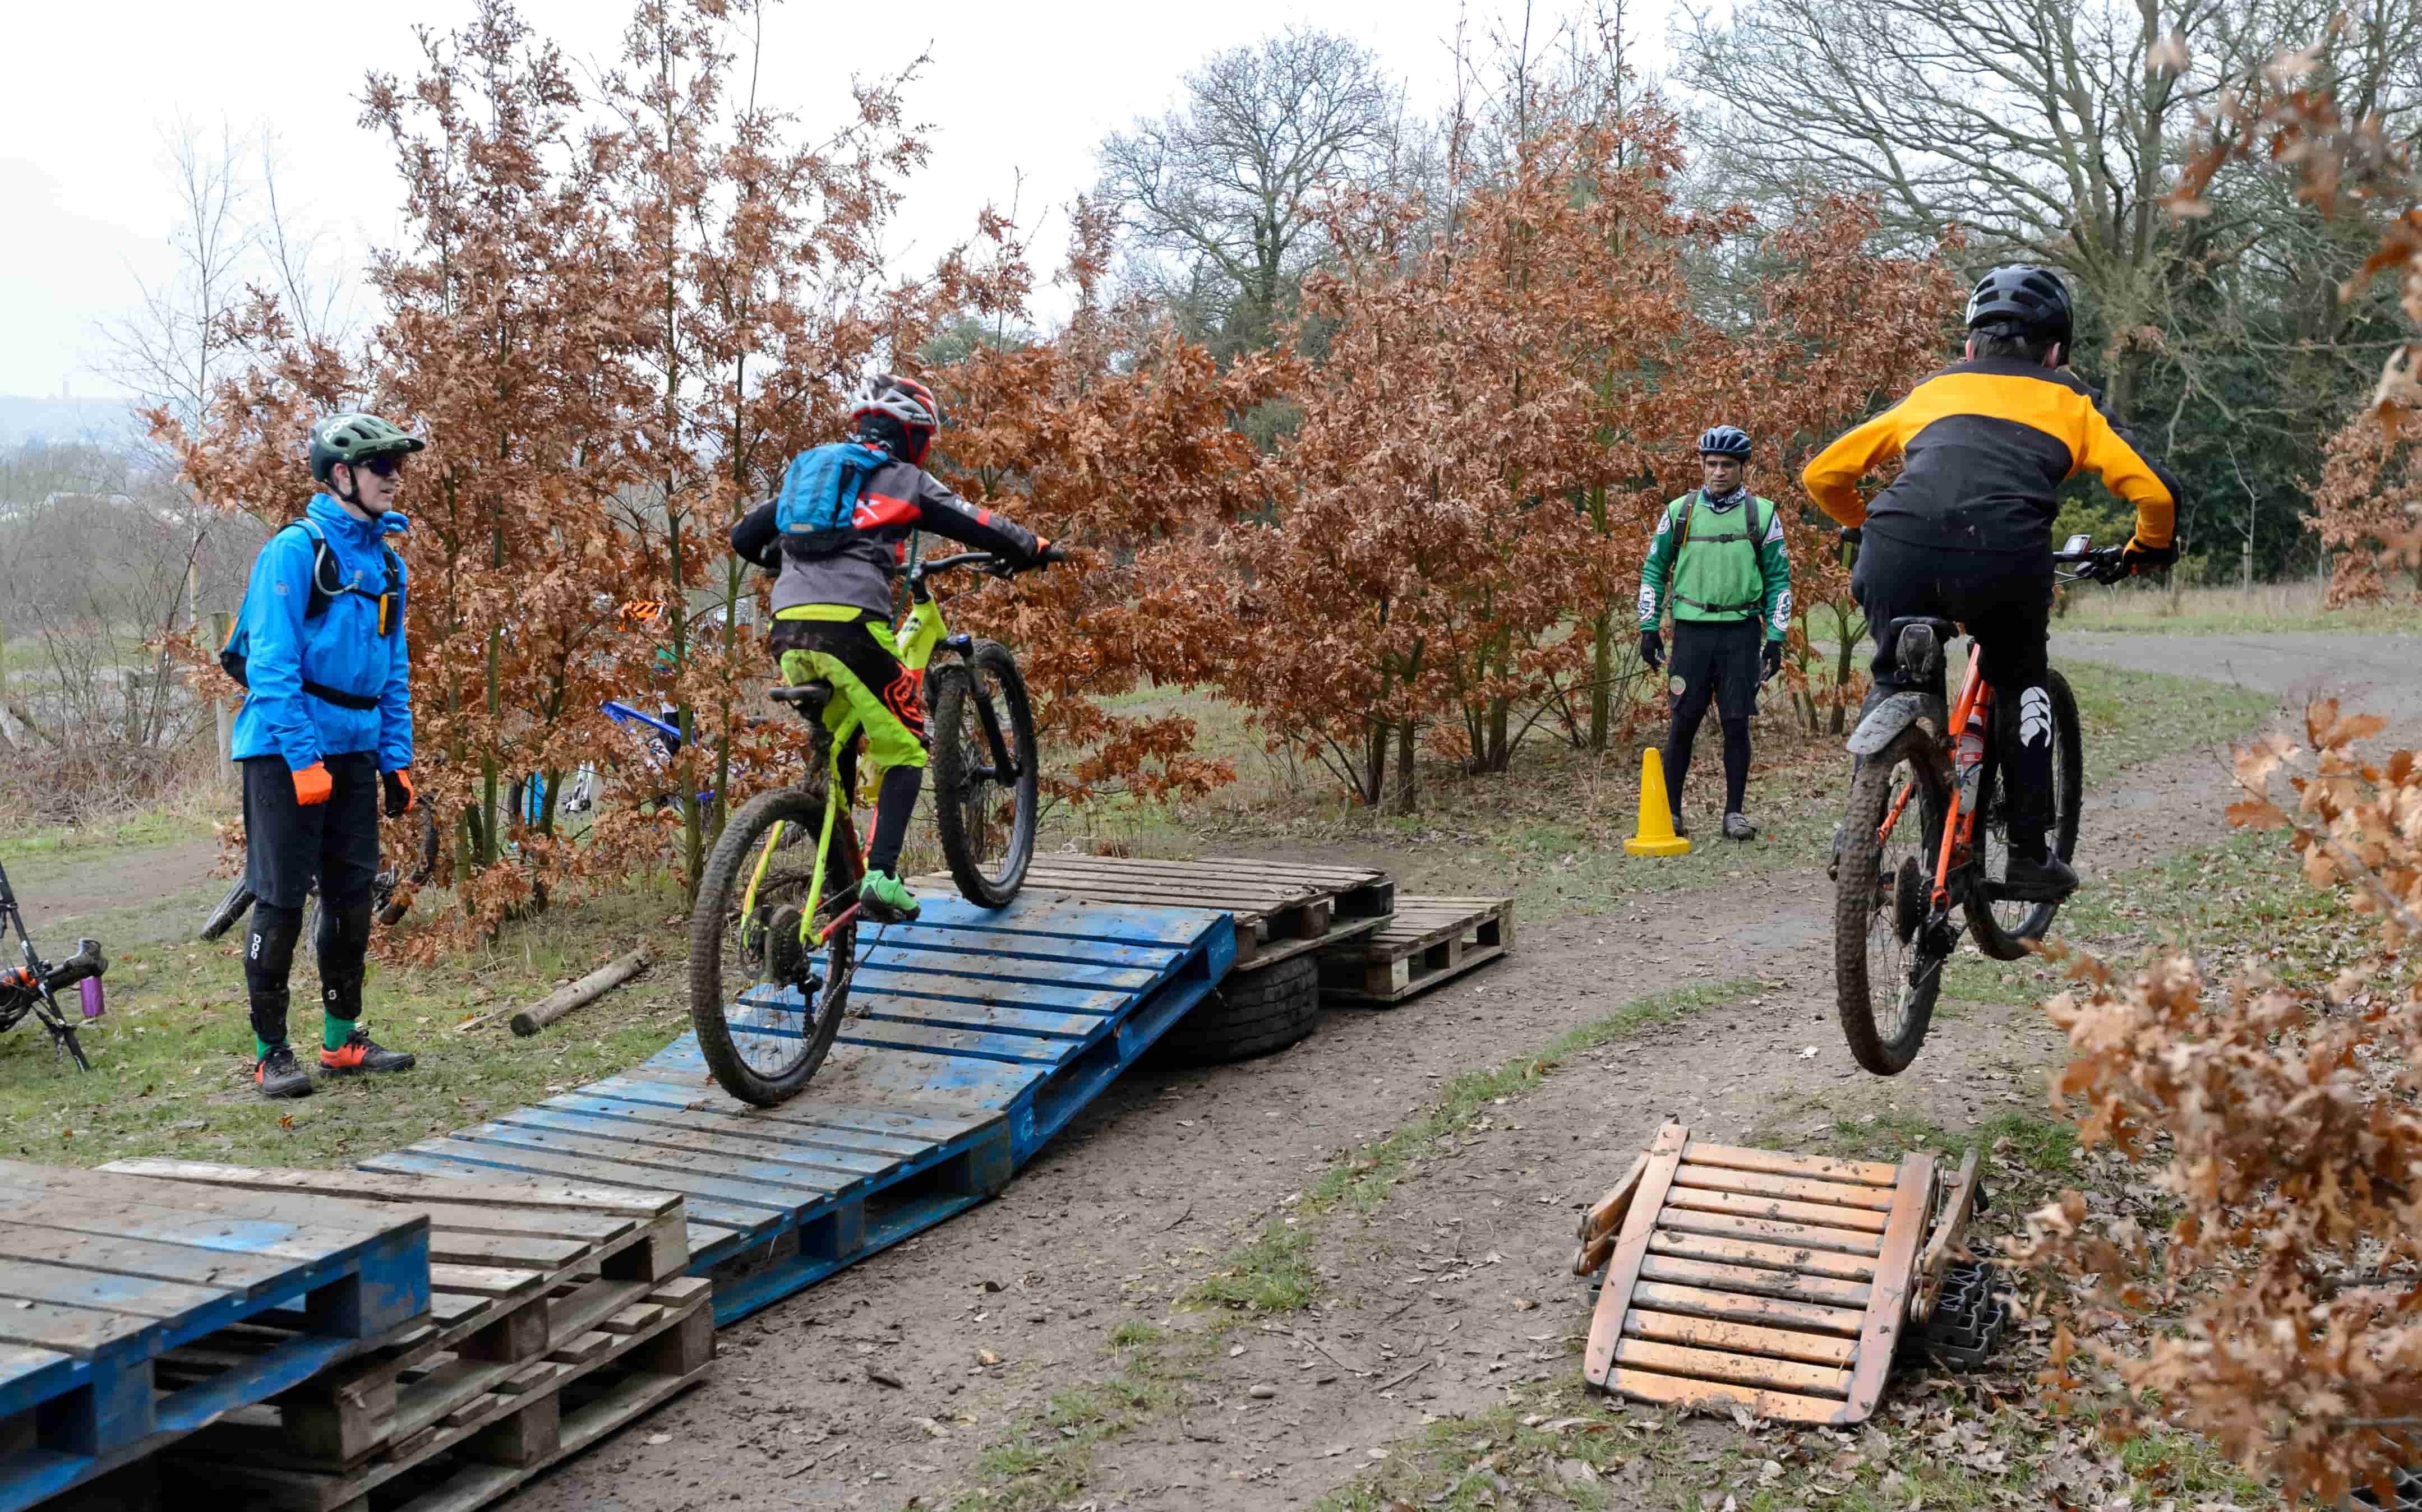 two people on mountain bikes being coaches to go over a ramp